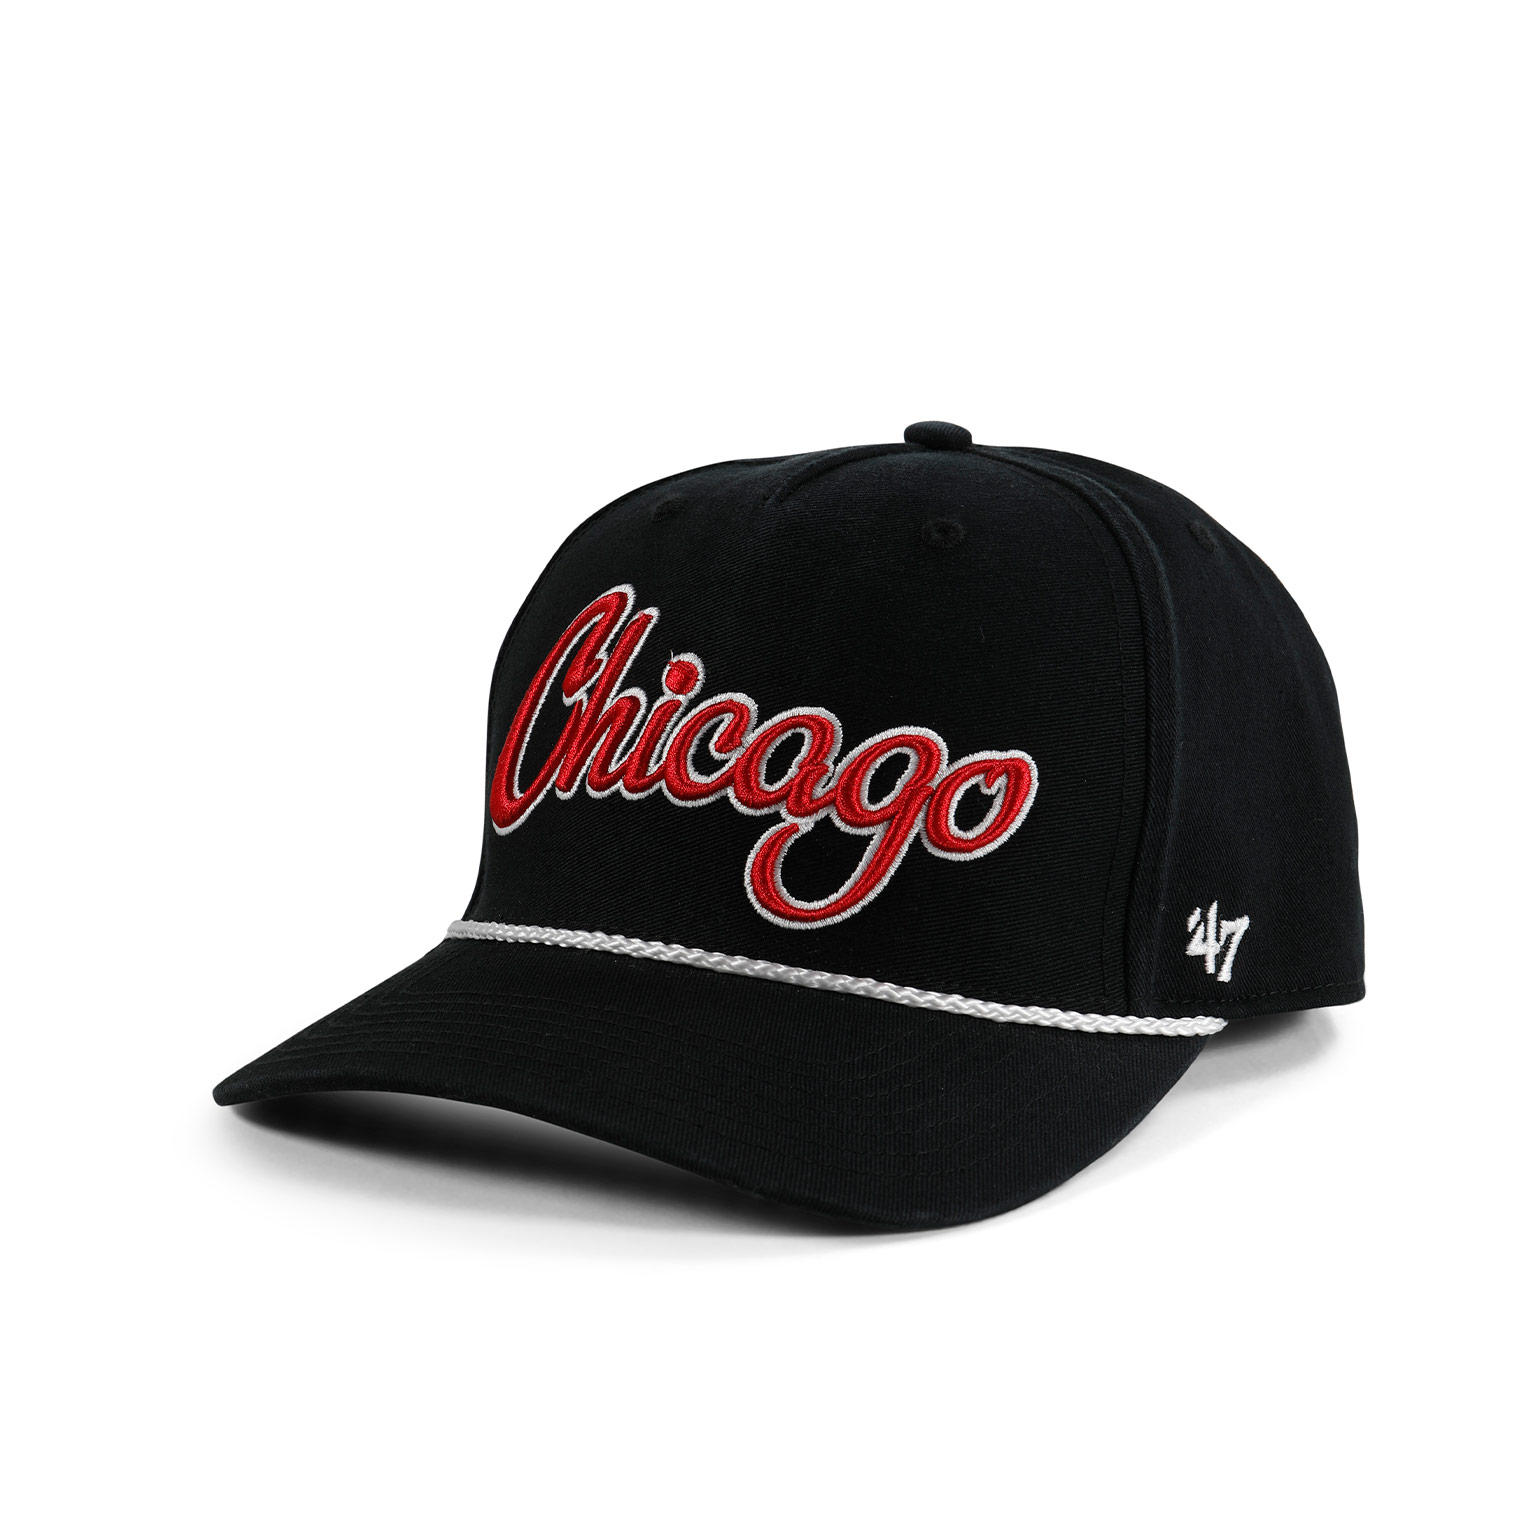 Chicago Bulls Black and Red Cap 2 · Available at Chicago O'Hare ...